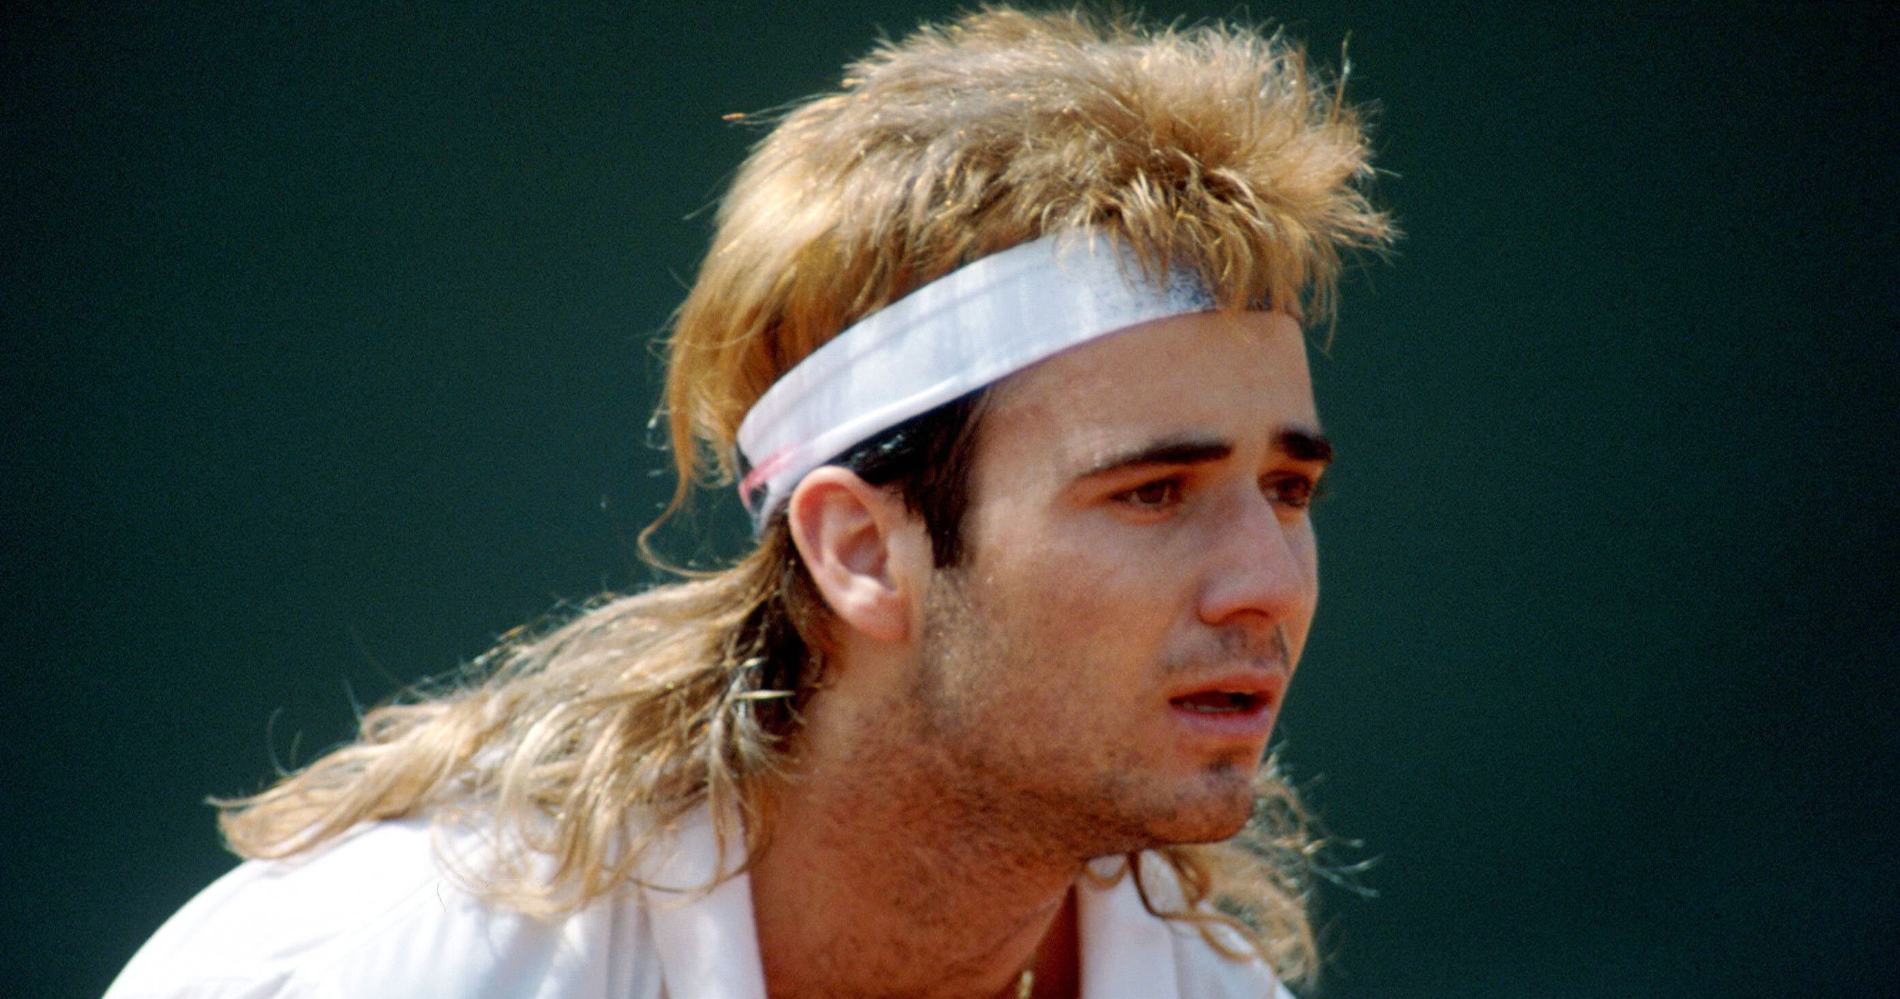 Andre Agassi - On this day